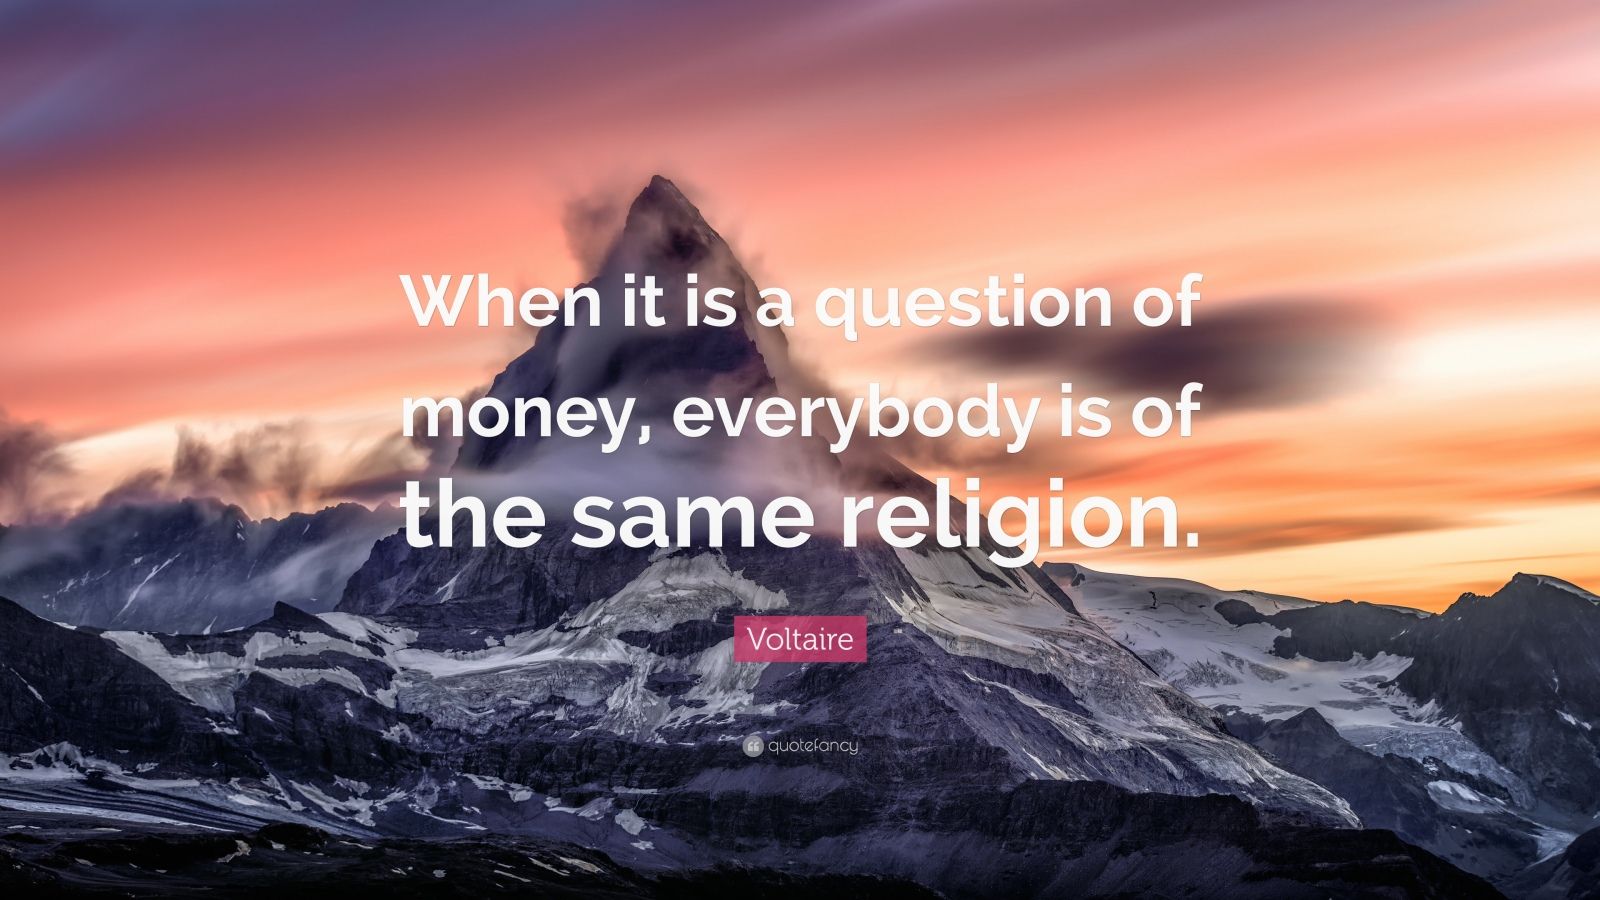 Voltaire Quote: “When it is a question of money, everybody is of the same religion ...1600 x 900